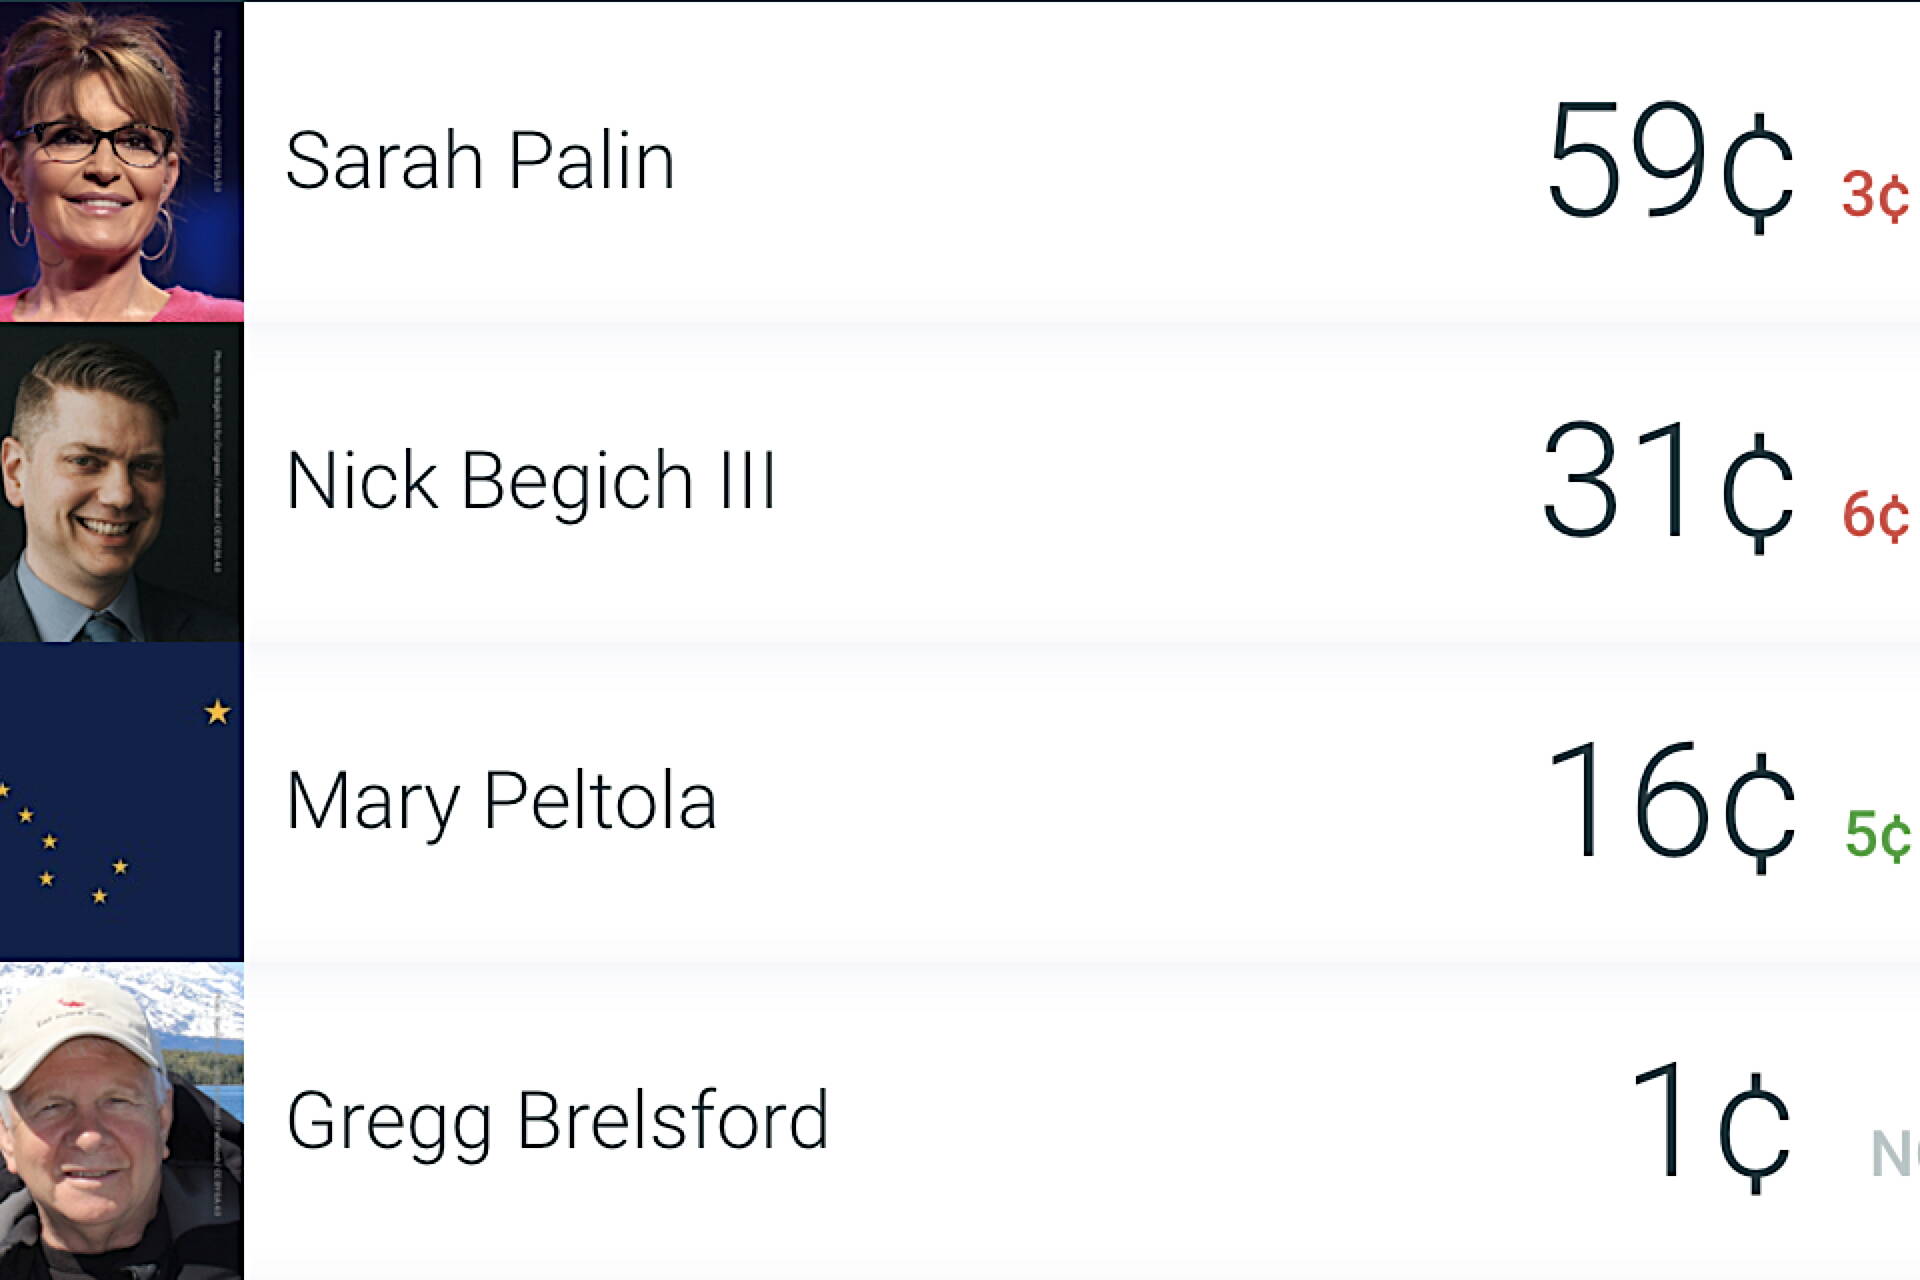 A betting chart lists Sarah Palin as the strong favorite to win the special election for Alaska’s U.S. House seat next Tuesday despite polling suggesting she is the least likely of the three candidates on the ballot to prevail. (Screenshot from www.predictit.org)